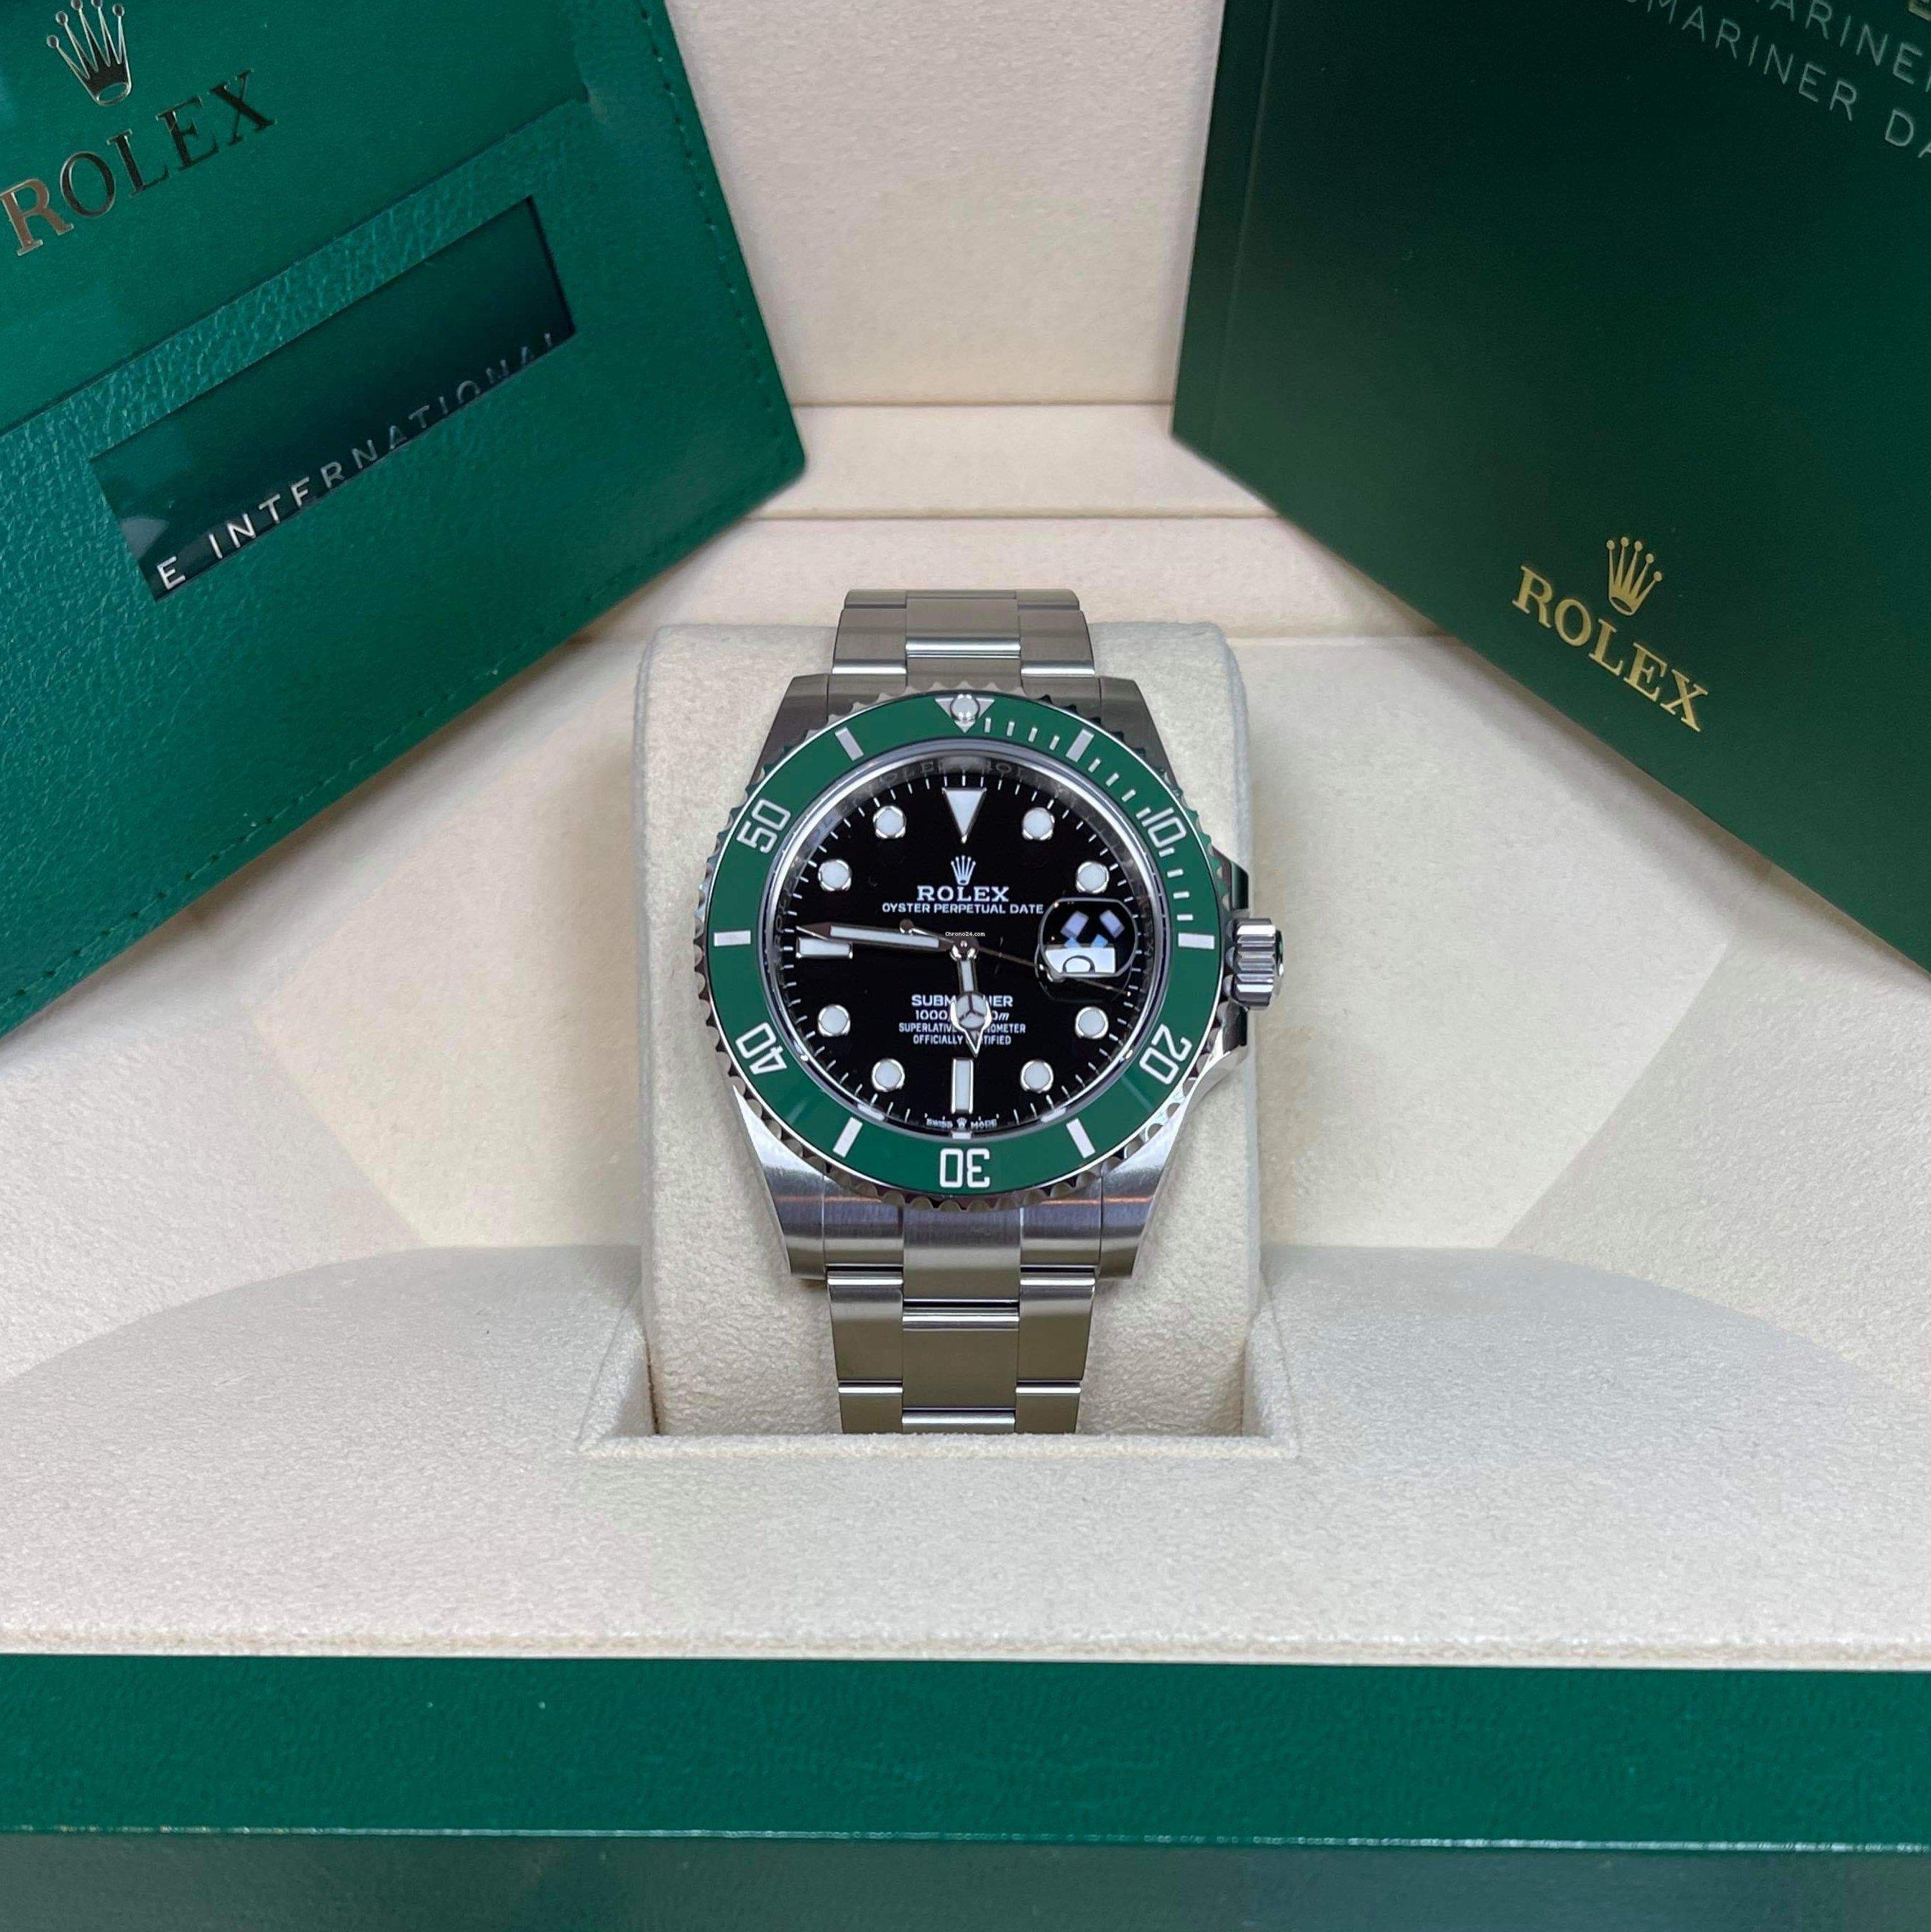 Rolex Steel Submariner Date Watch - The Starbucks / Kermit- Green Bezel - Black Dial - 2020 Release

41 mm Oystersteel case, screw-down crown with triplock triple waterproofness system, unidirectional rotatable bezel with green Cerachrom insert and